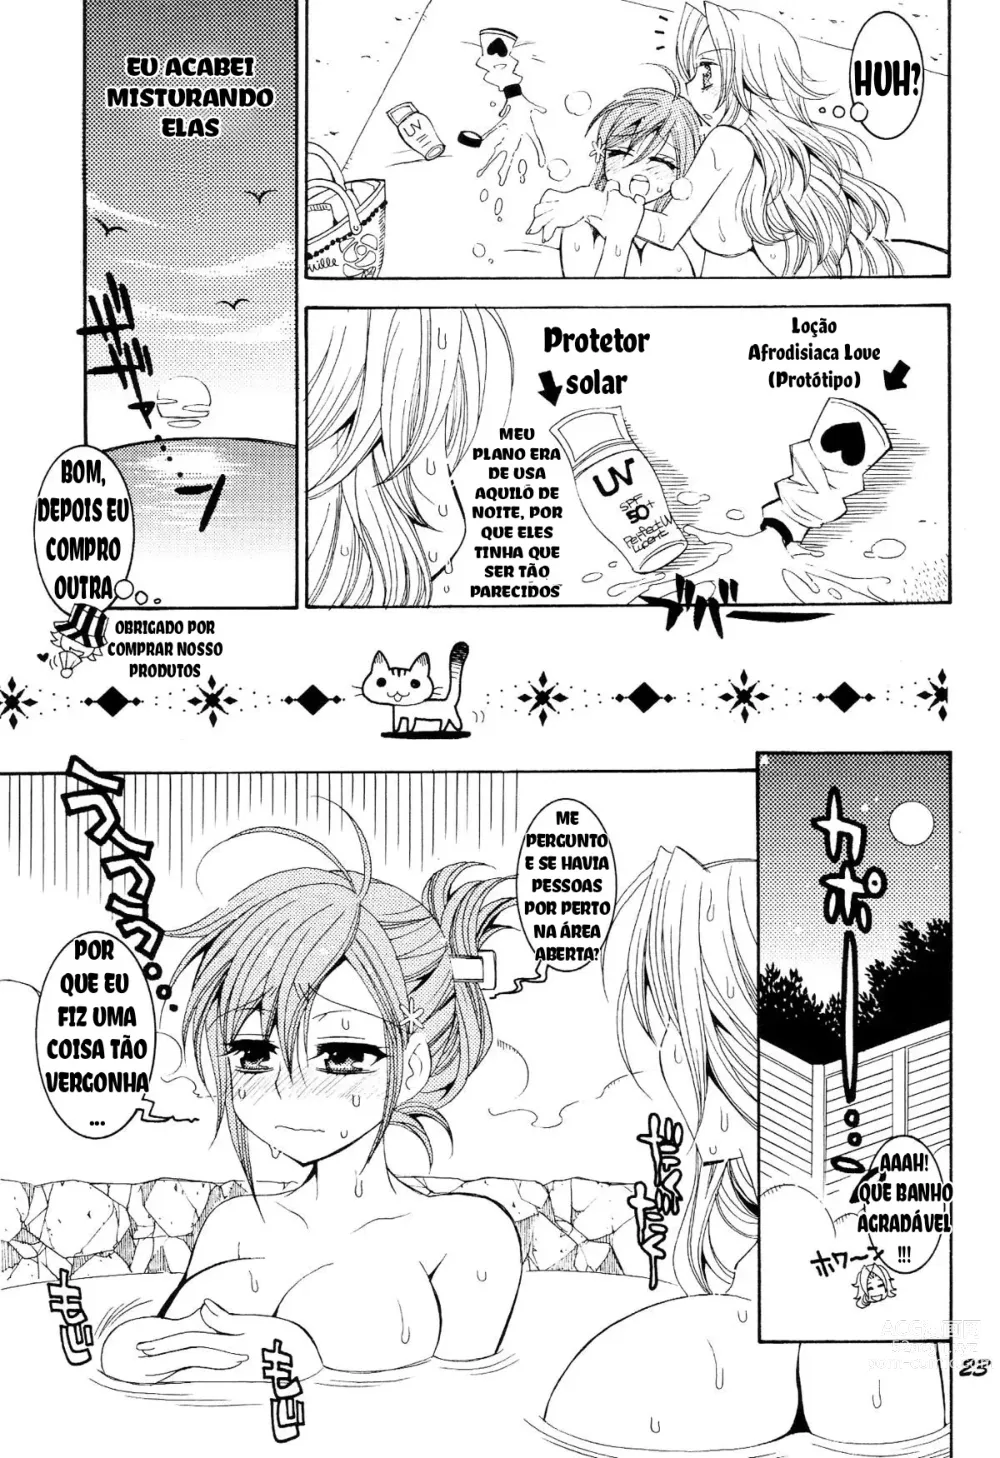 Page 22 of doujinshi CHICK CHICK CHICK